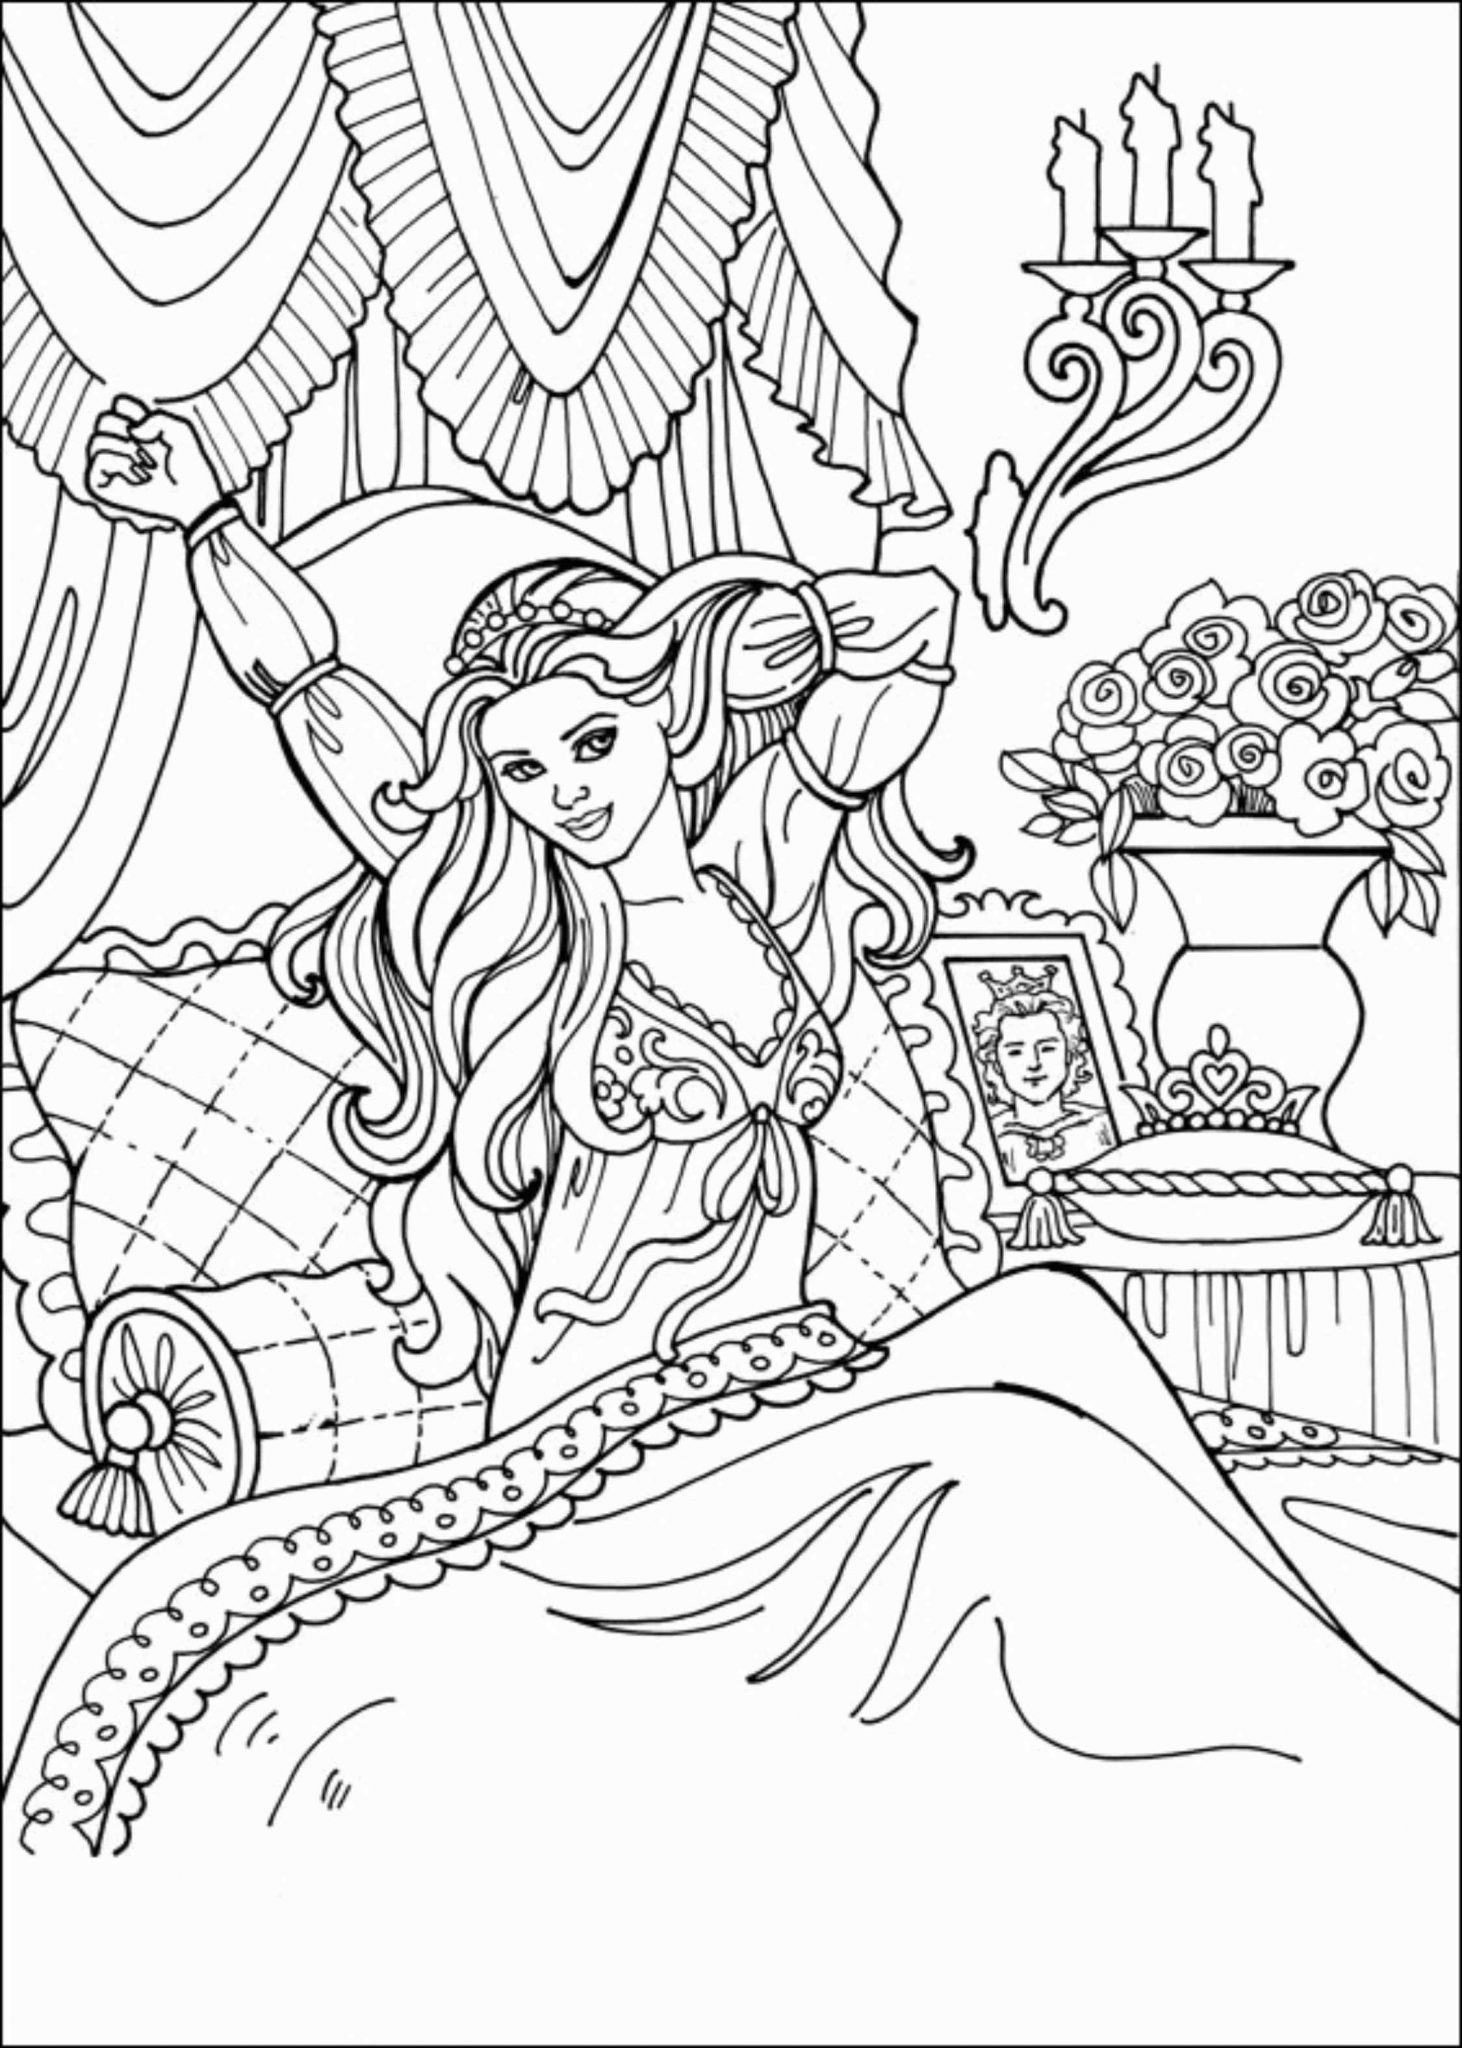 princess-coloring-pages-best-coloring-pages-for-kids-print-download-princess-coloring-pages